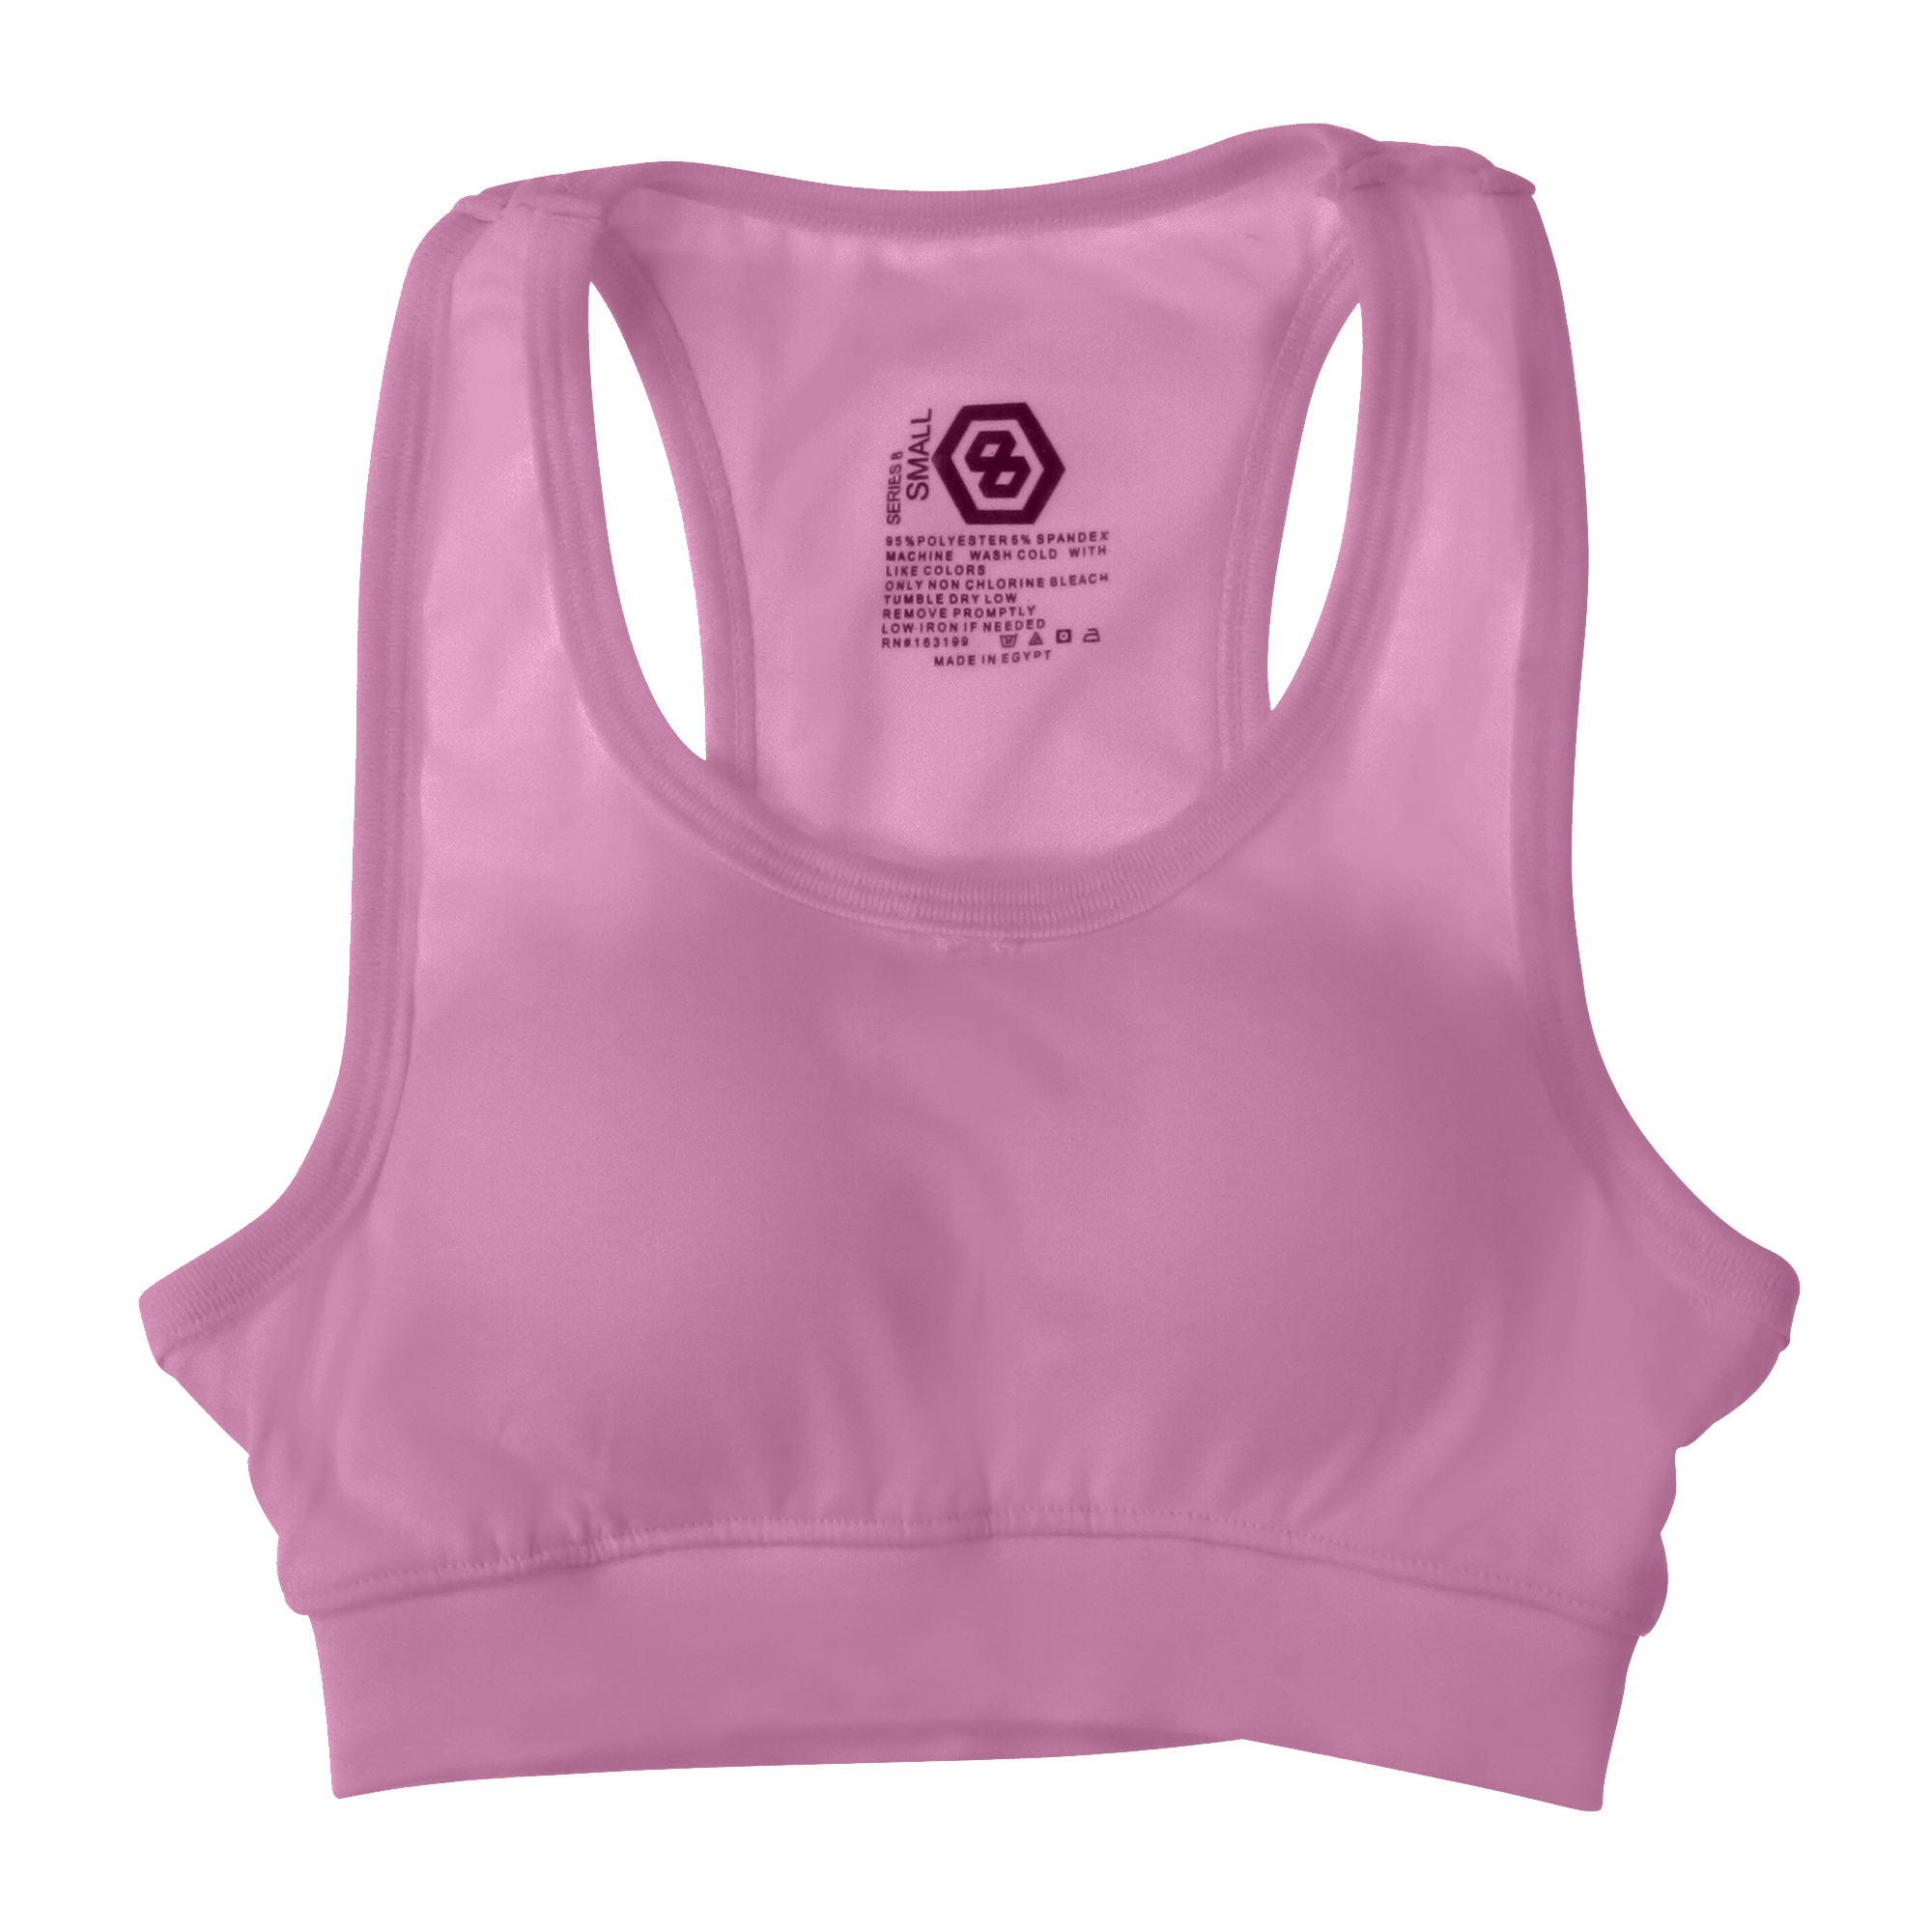 Five Below - 2-in-1 tank w/ built in bra (whoa!) Just $5 & sizes s-xl. Plus  leggings, slides, shorts, headbands & way more to take ur #workout to the  next level. 👏🎽👟